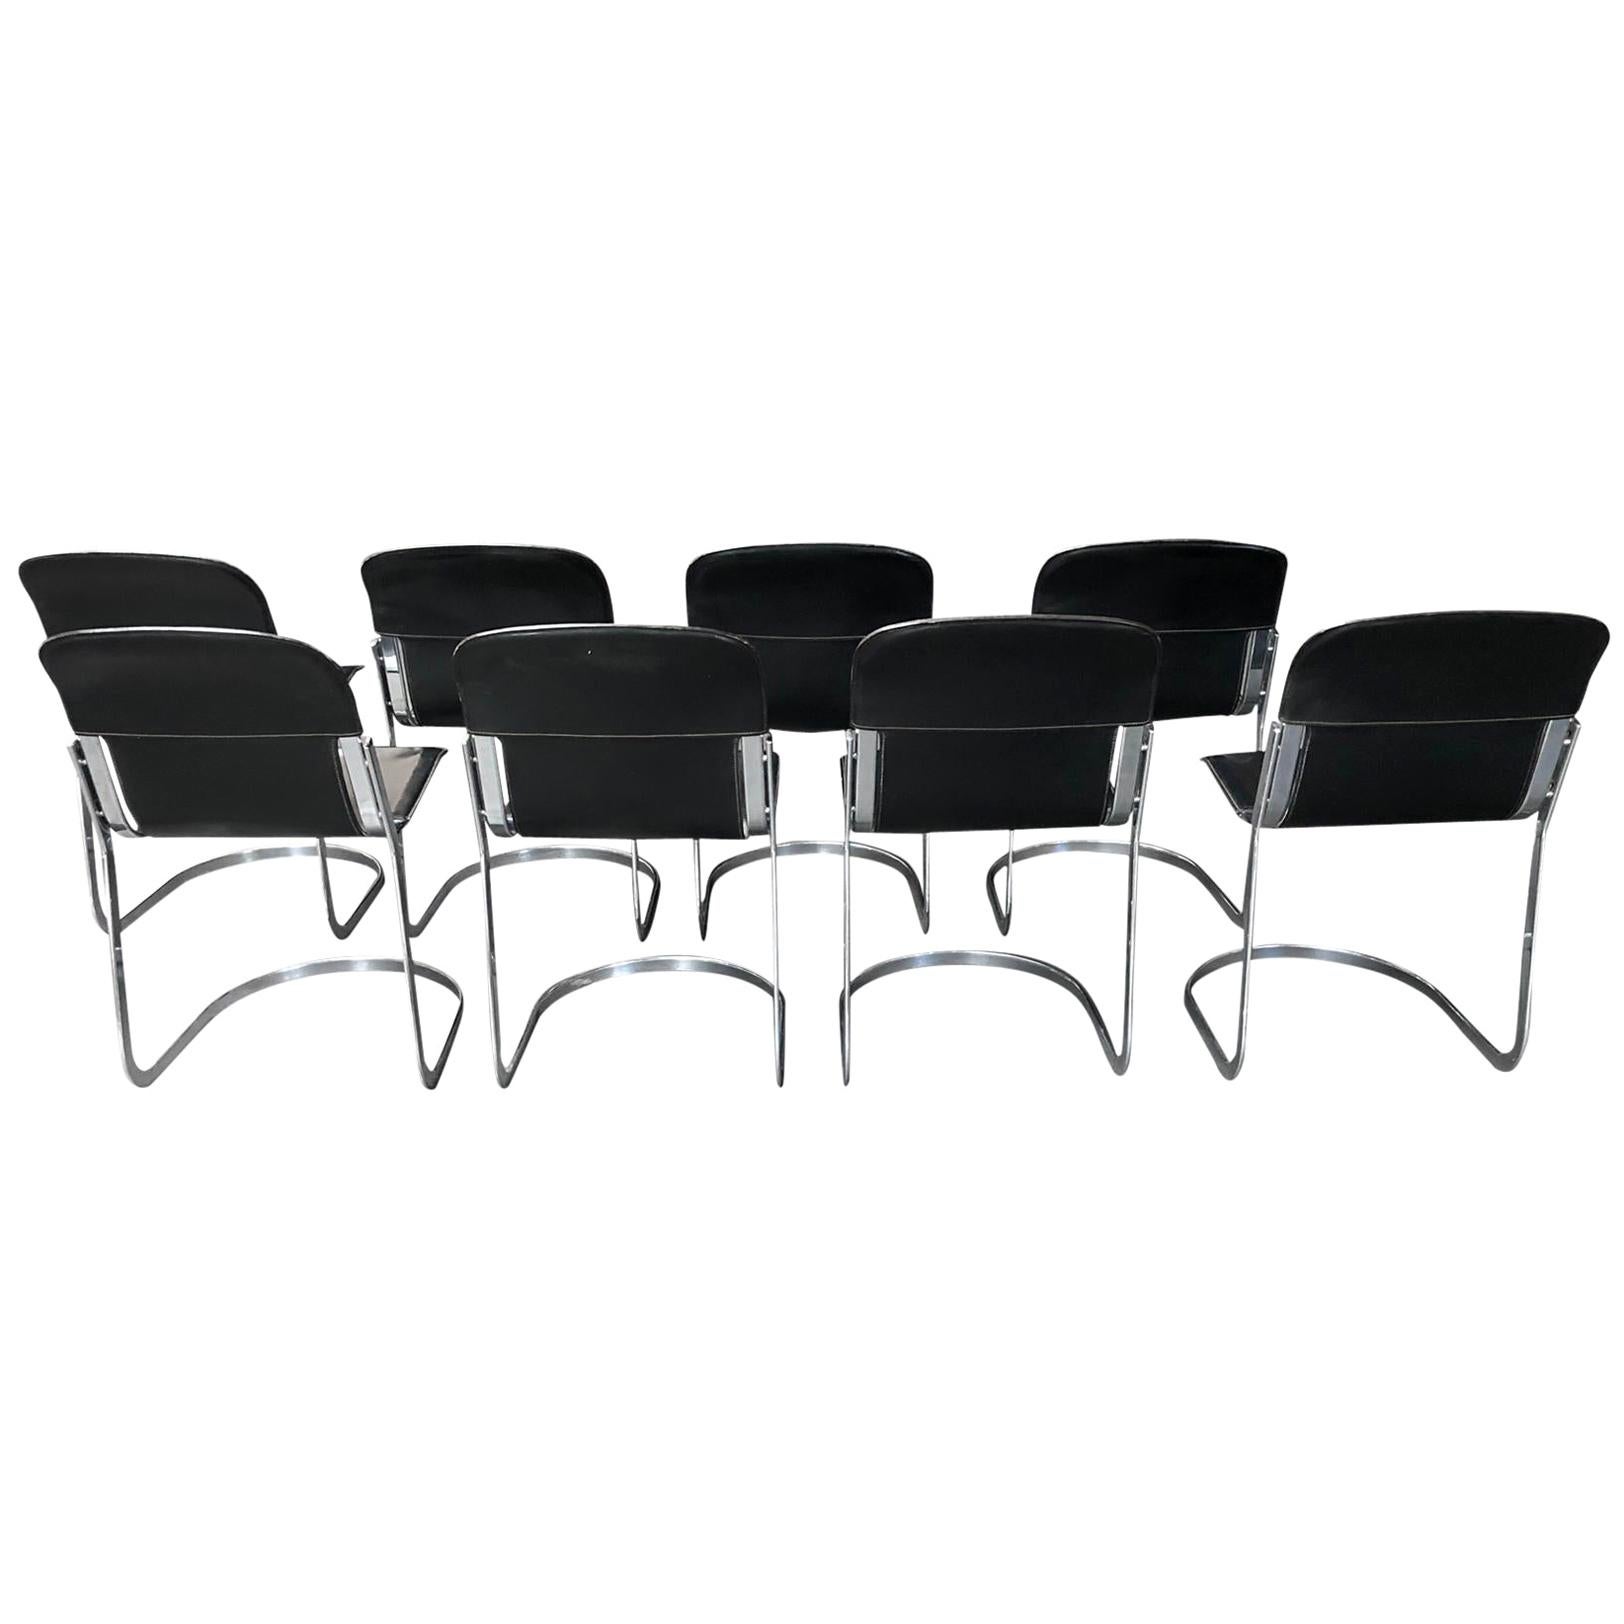 Set of 8 dining chairs designed by Willy Rizzo for Cidue (model C2).

The chairs have a beautifully shaped chrome frame and come with the original black leather seats.

The chairs are stackable.

Very good condition, no discoloration, no